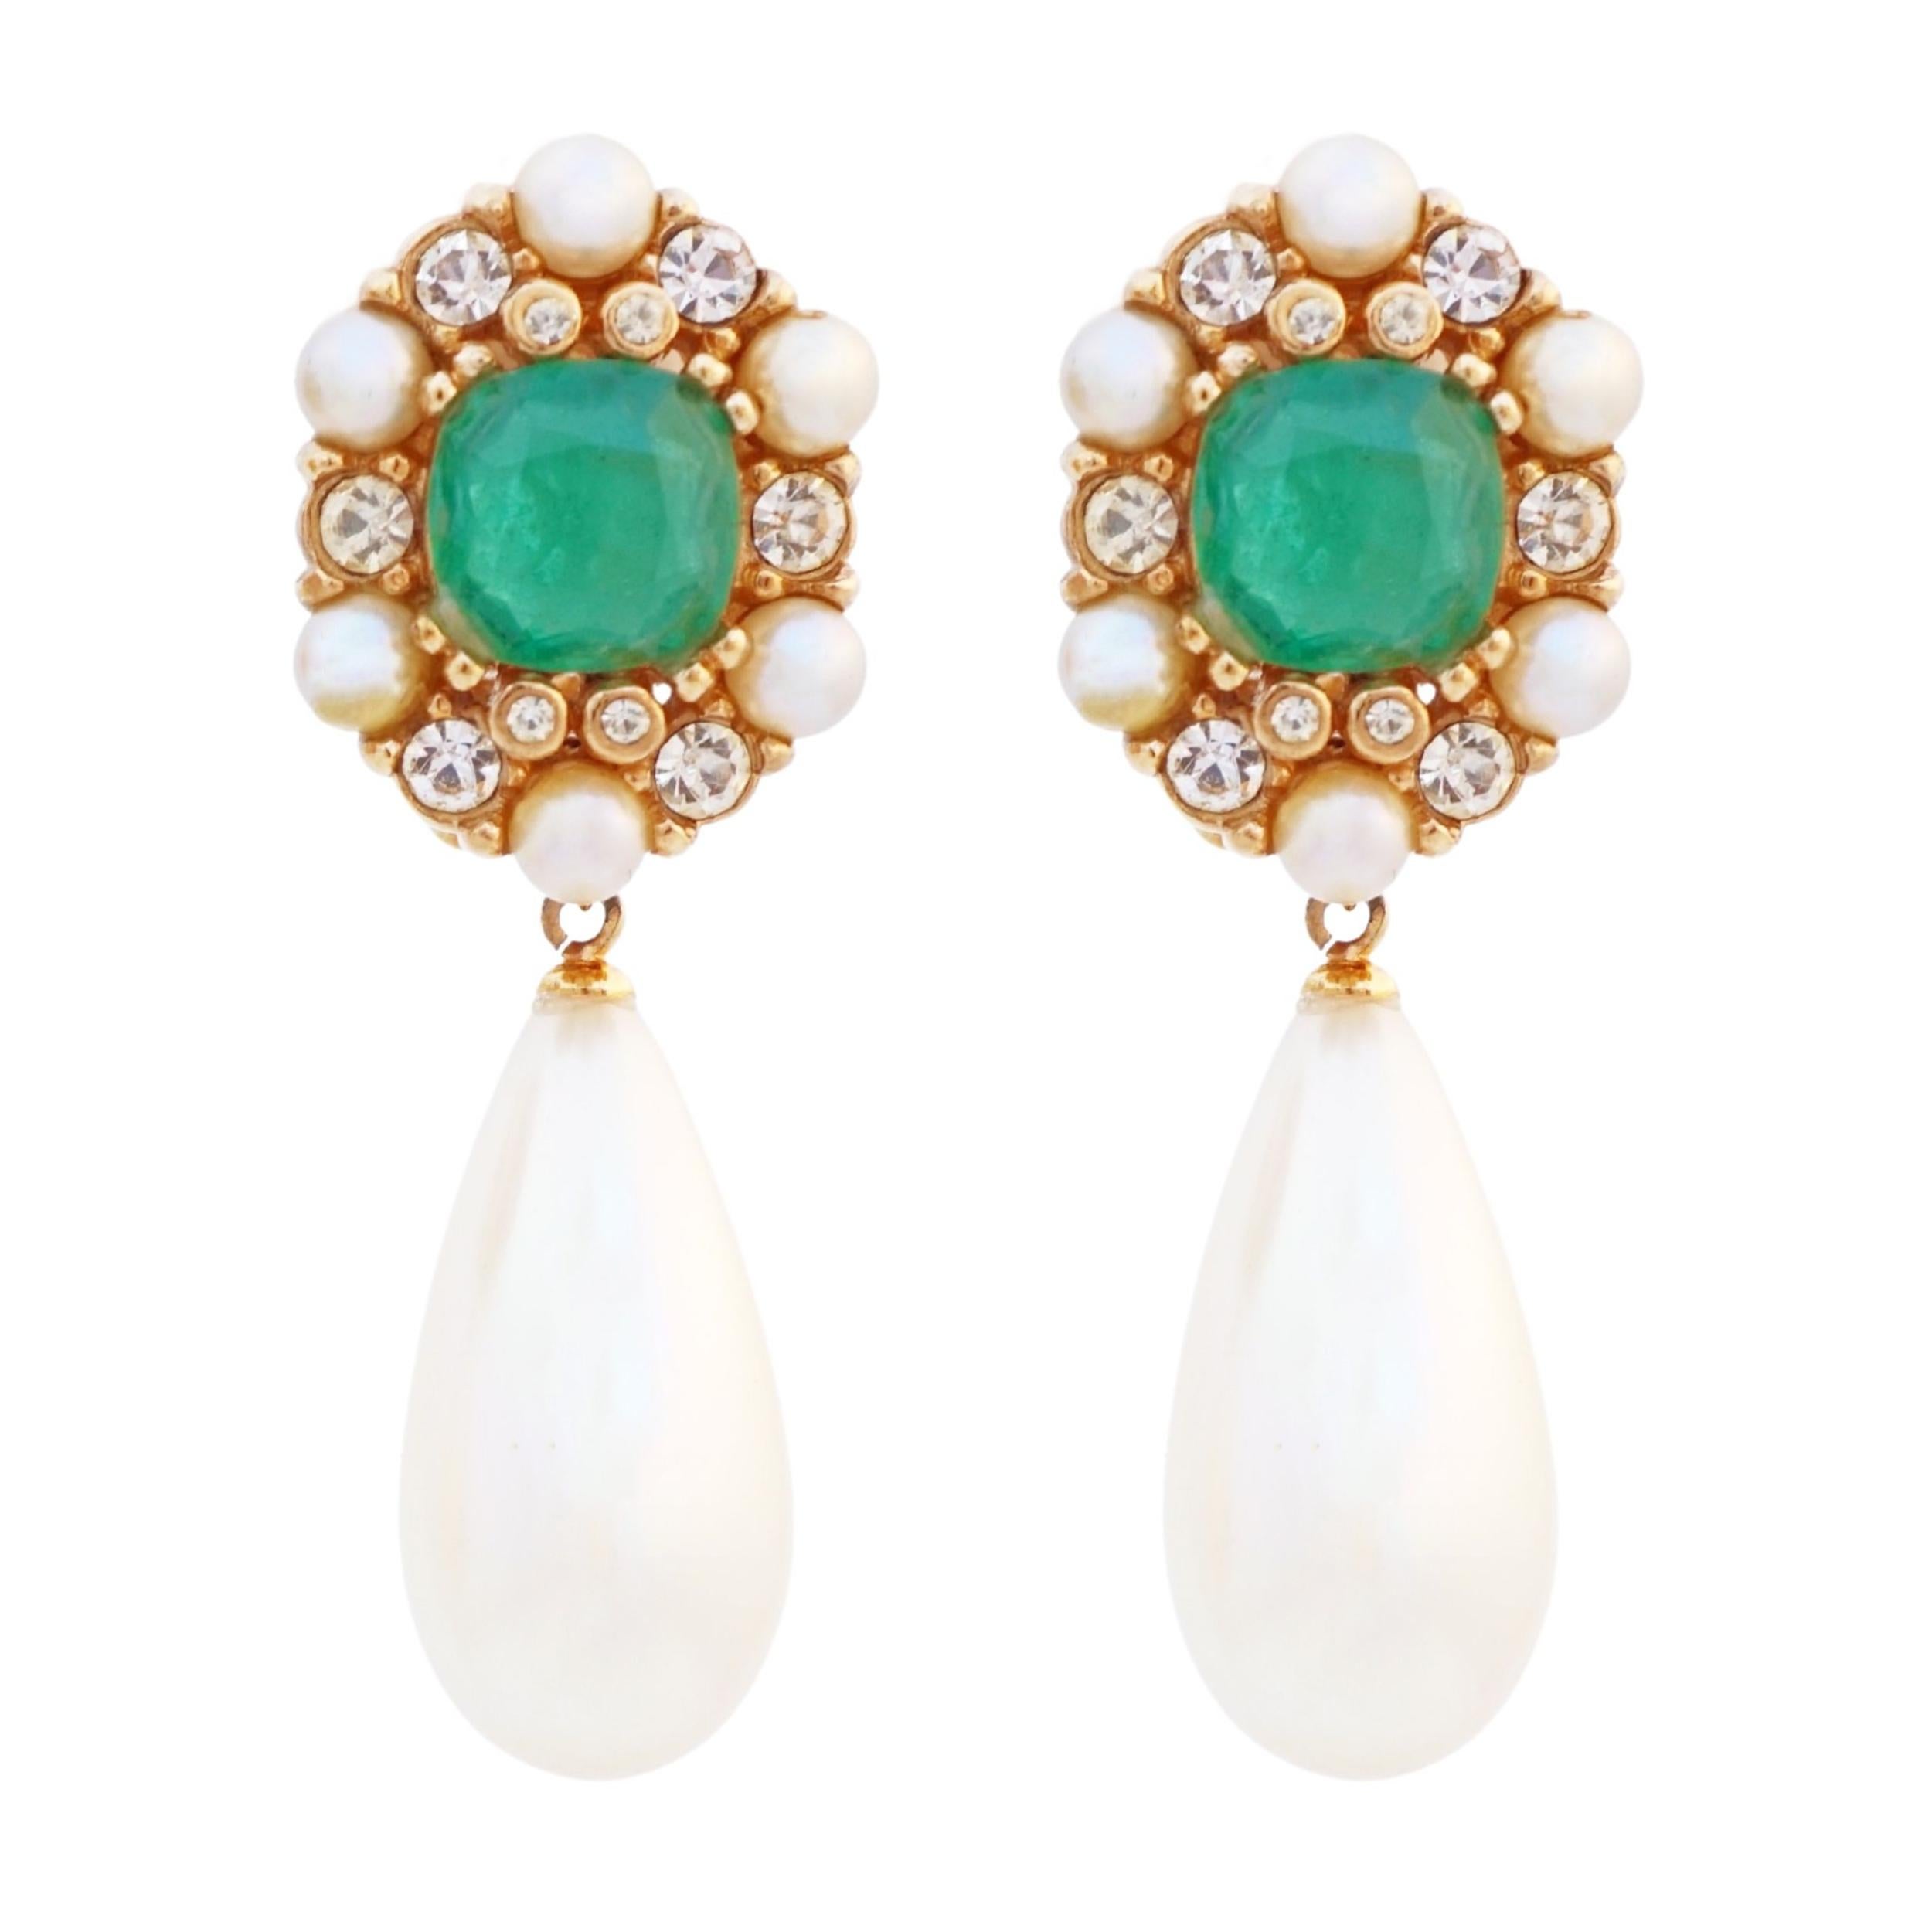 Flawed Emerald Art Glass With Crystal & Pearl Halo Drop Earrings By Ciner, 1960s